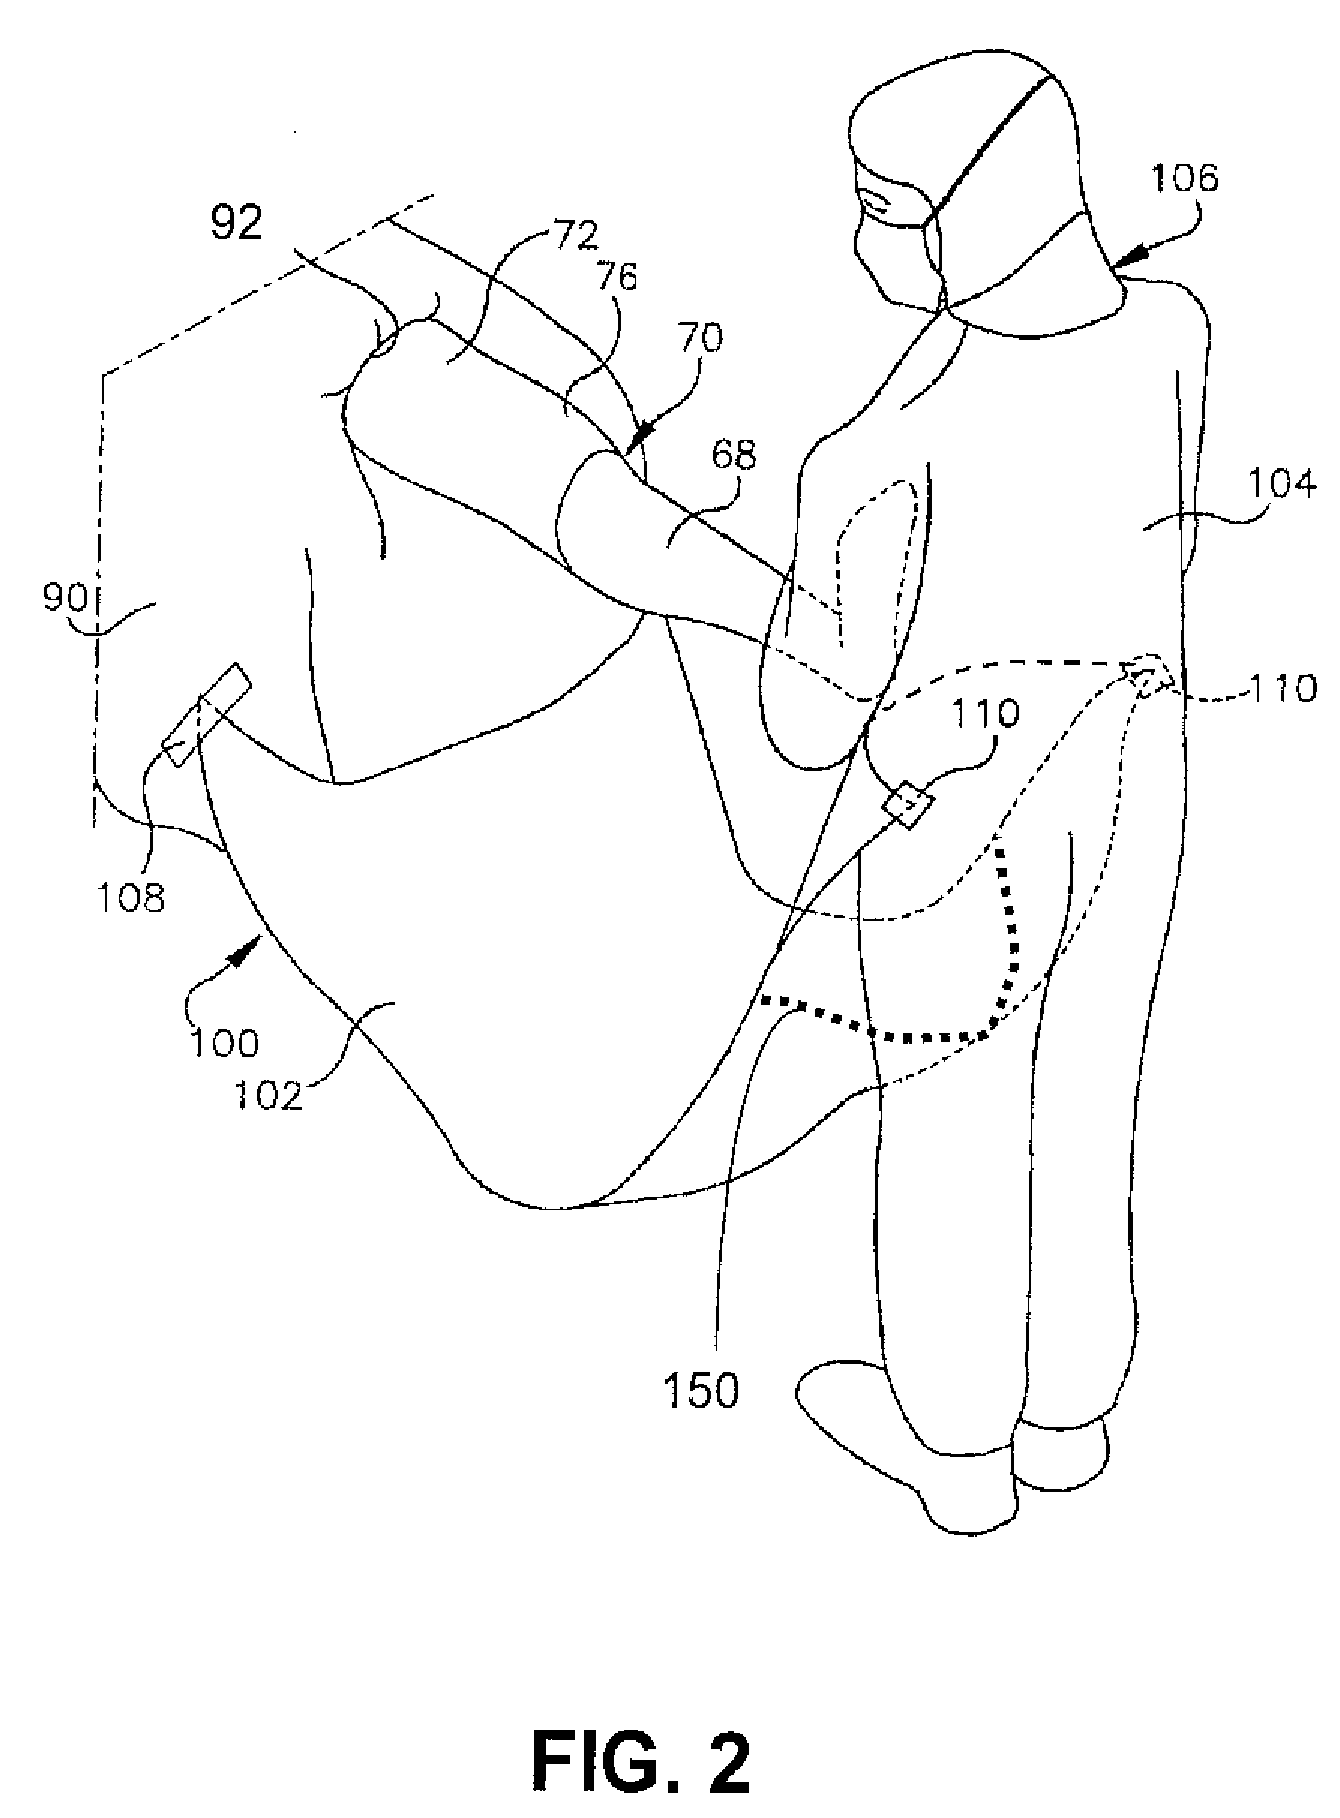 Surgical draping system